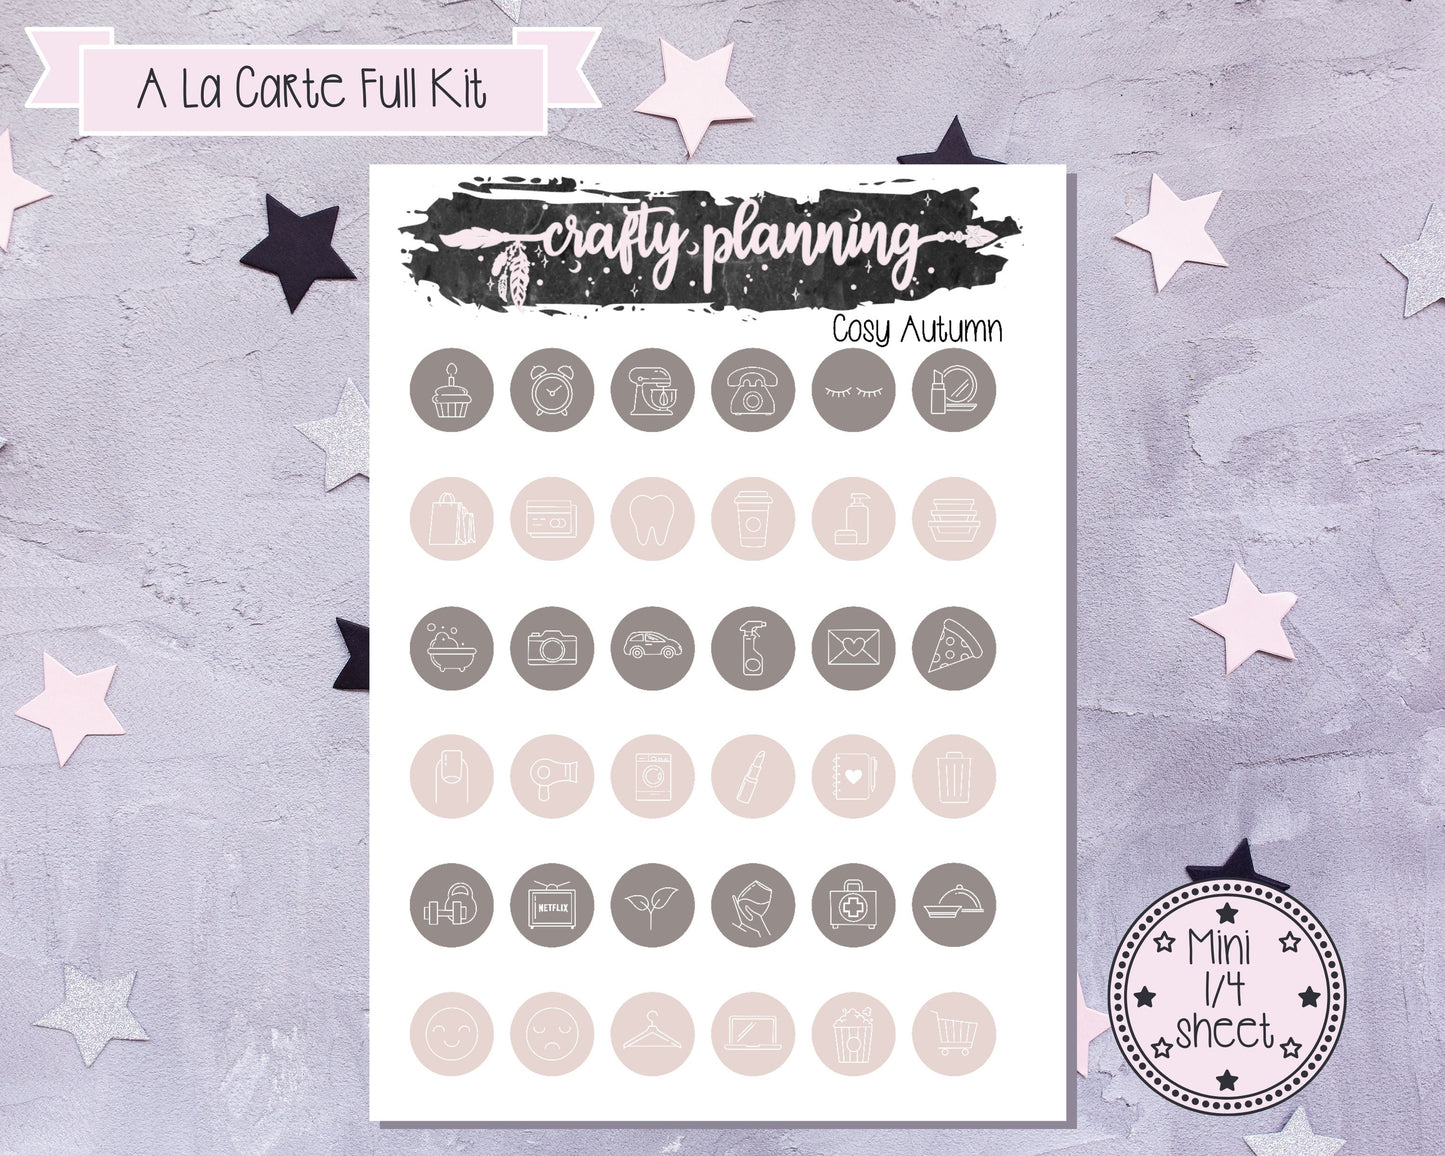 Cosy Autumn Weekly Planner Kit, Planner Stickers, Fall Planner Kit, Autumn Planner Kit, Standard Vertical, Deluxe Kit, A La Carte